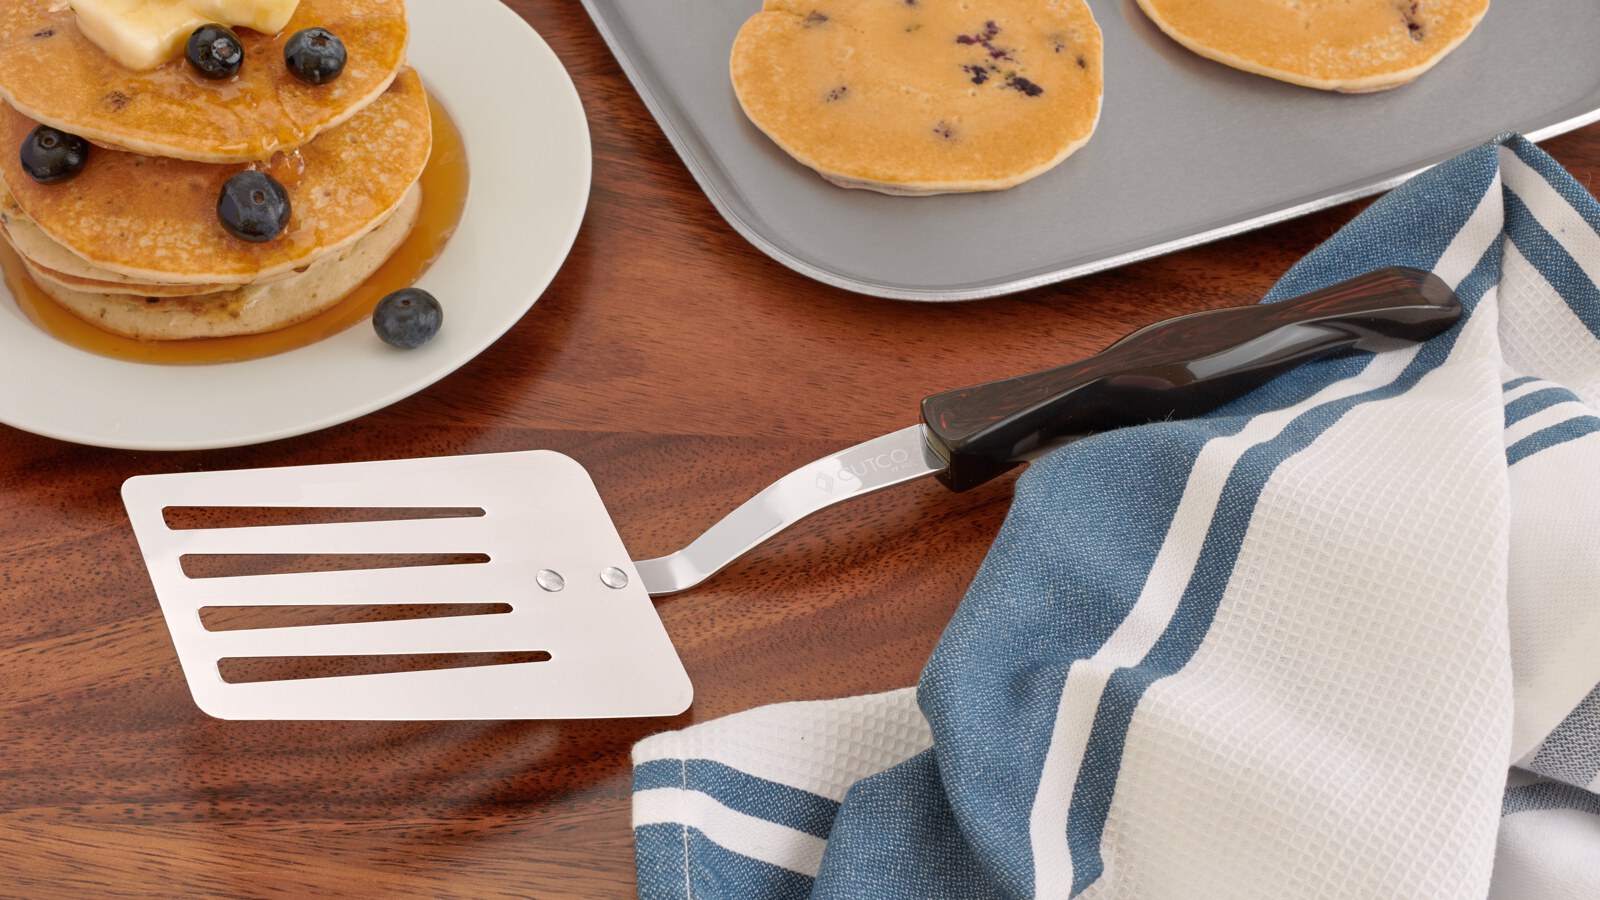 What Is A Slotted Spatula Used For